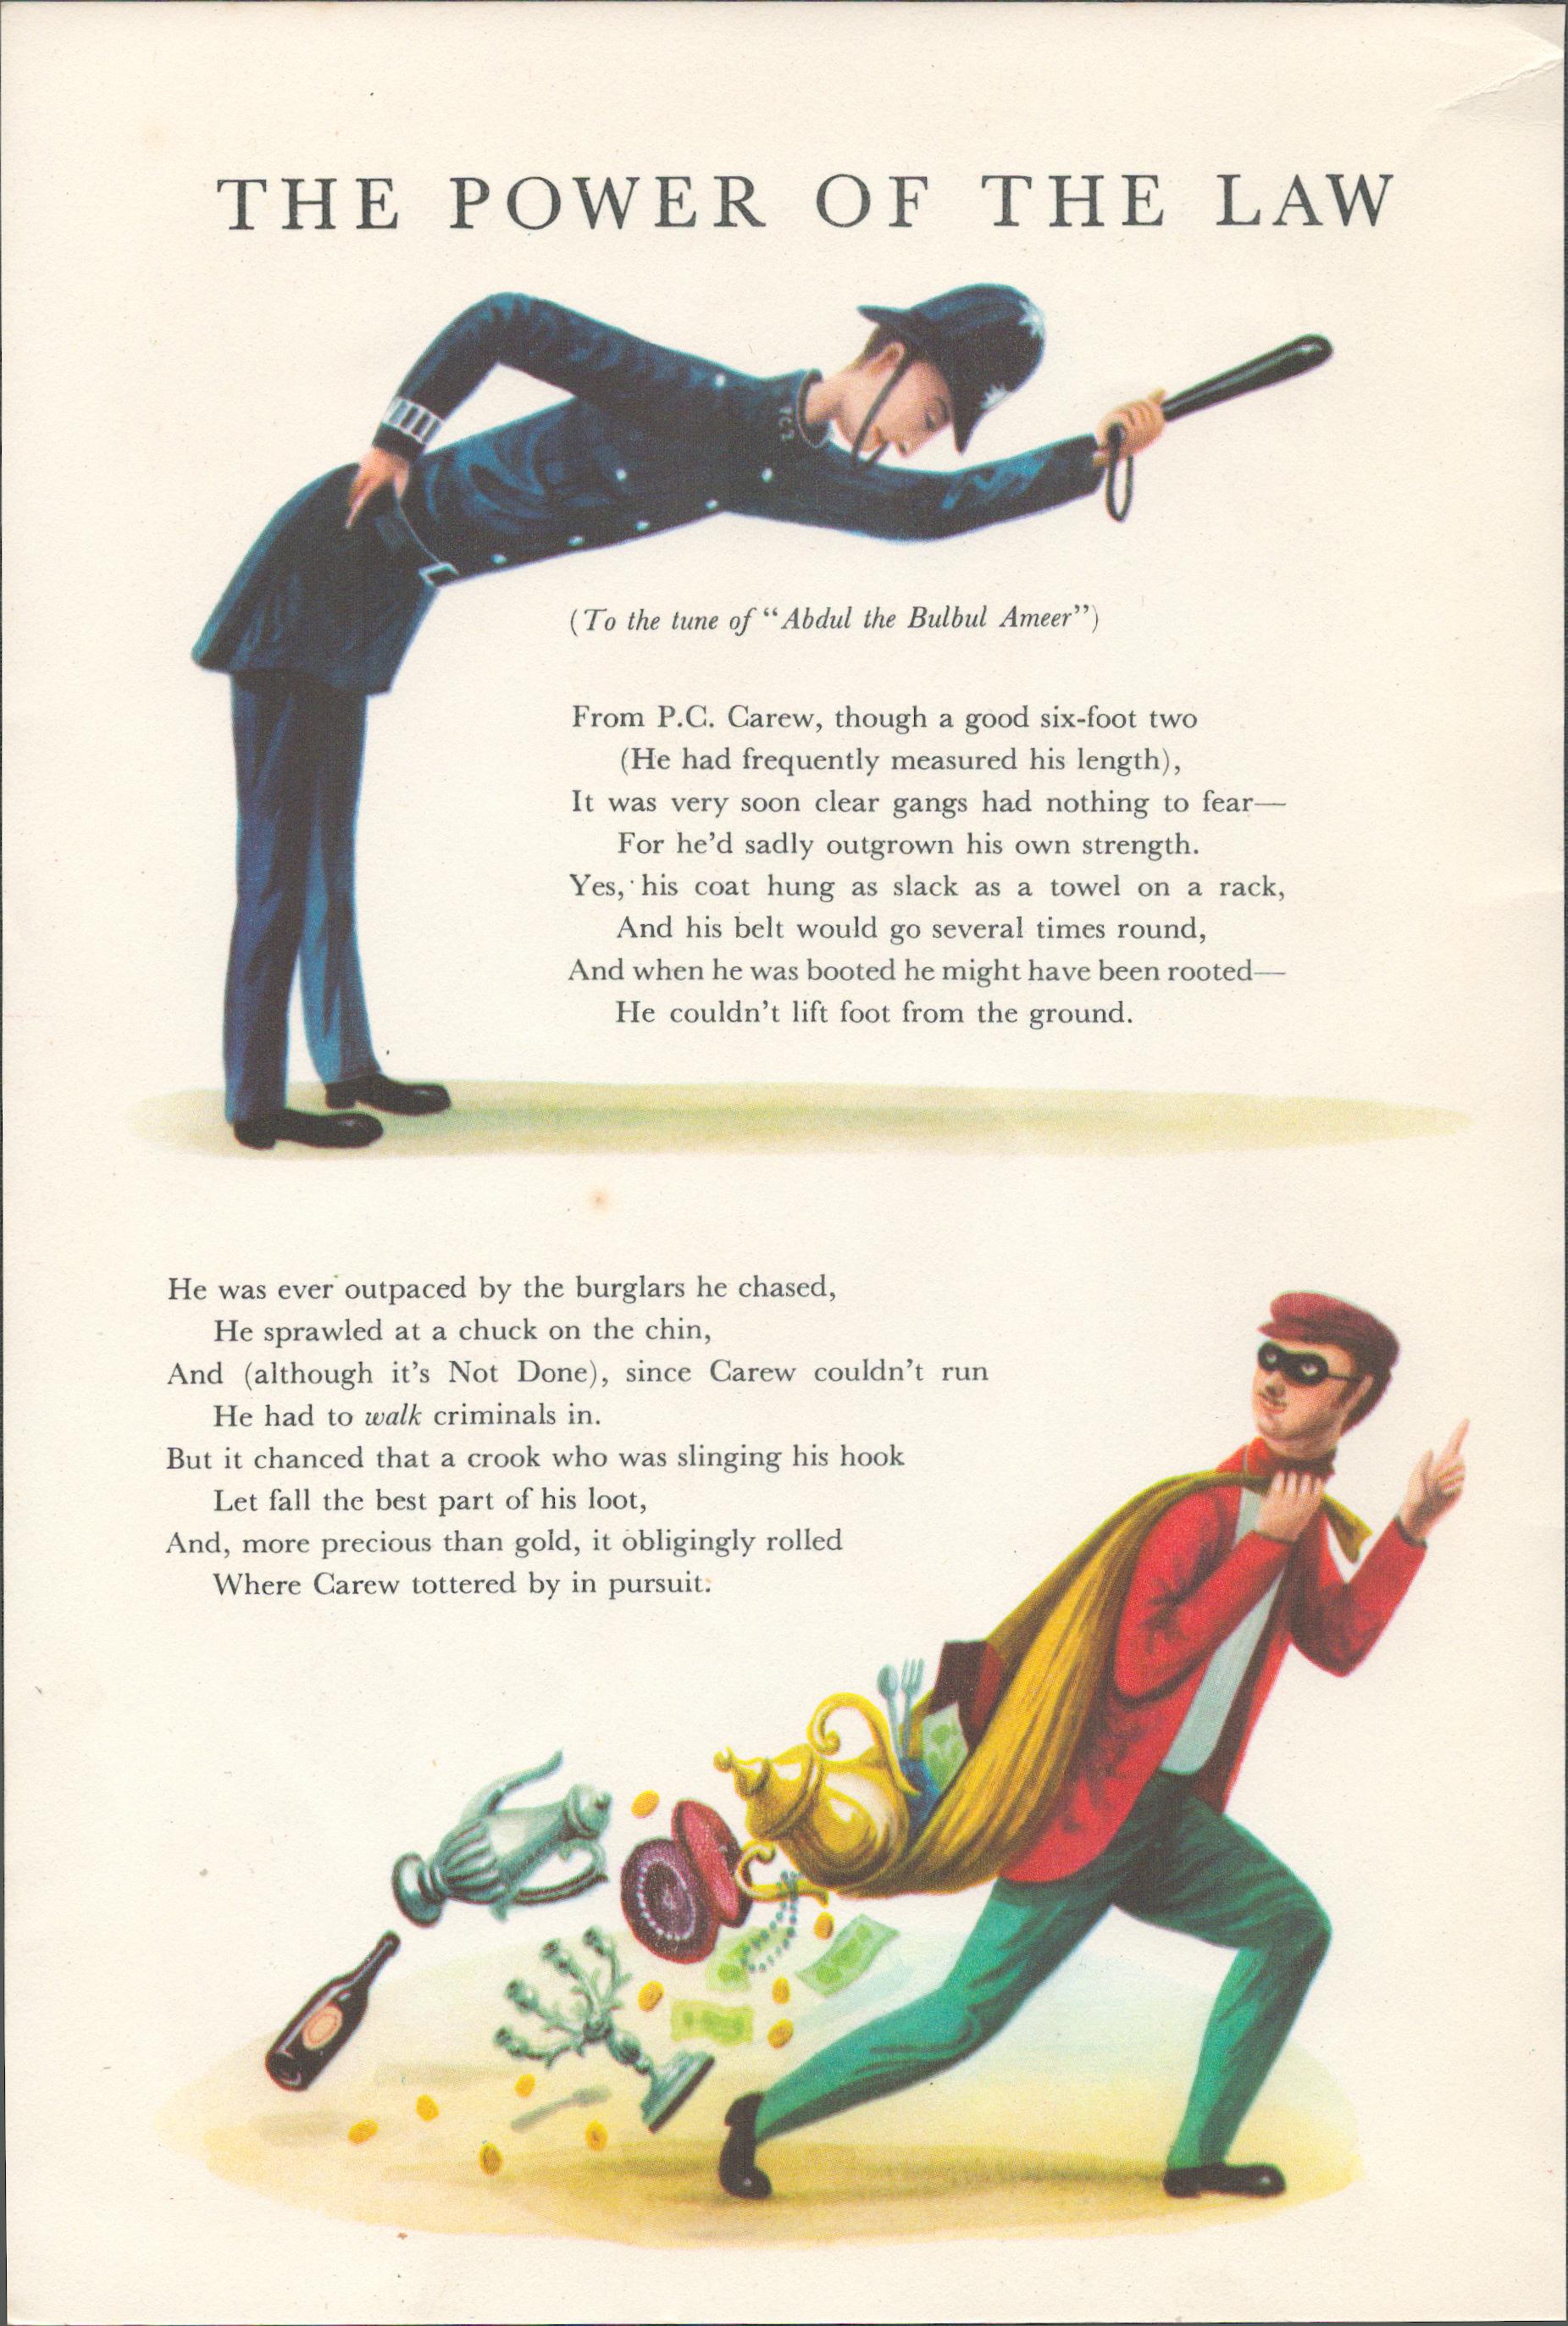 1954 Guinness Double Page Illustration 'Power Of the Law' & 'Marriage'